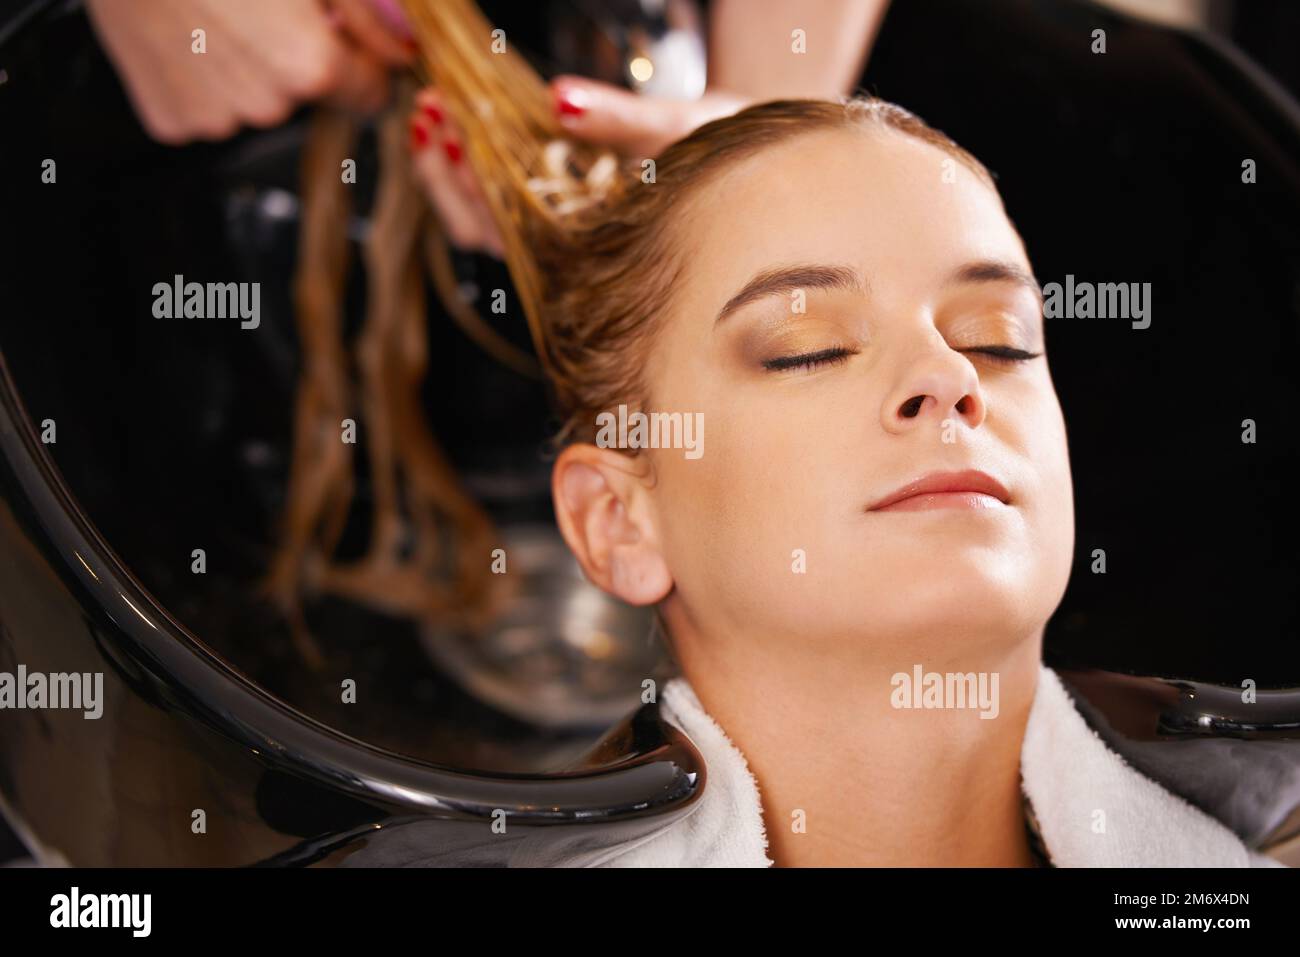 Happiness is a day at the salon. a young woman having her hair washed at a hair salon. Stock Photo